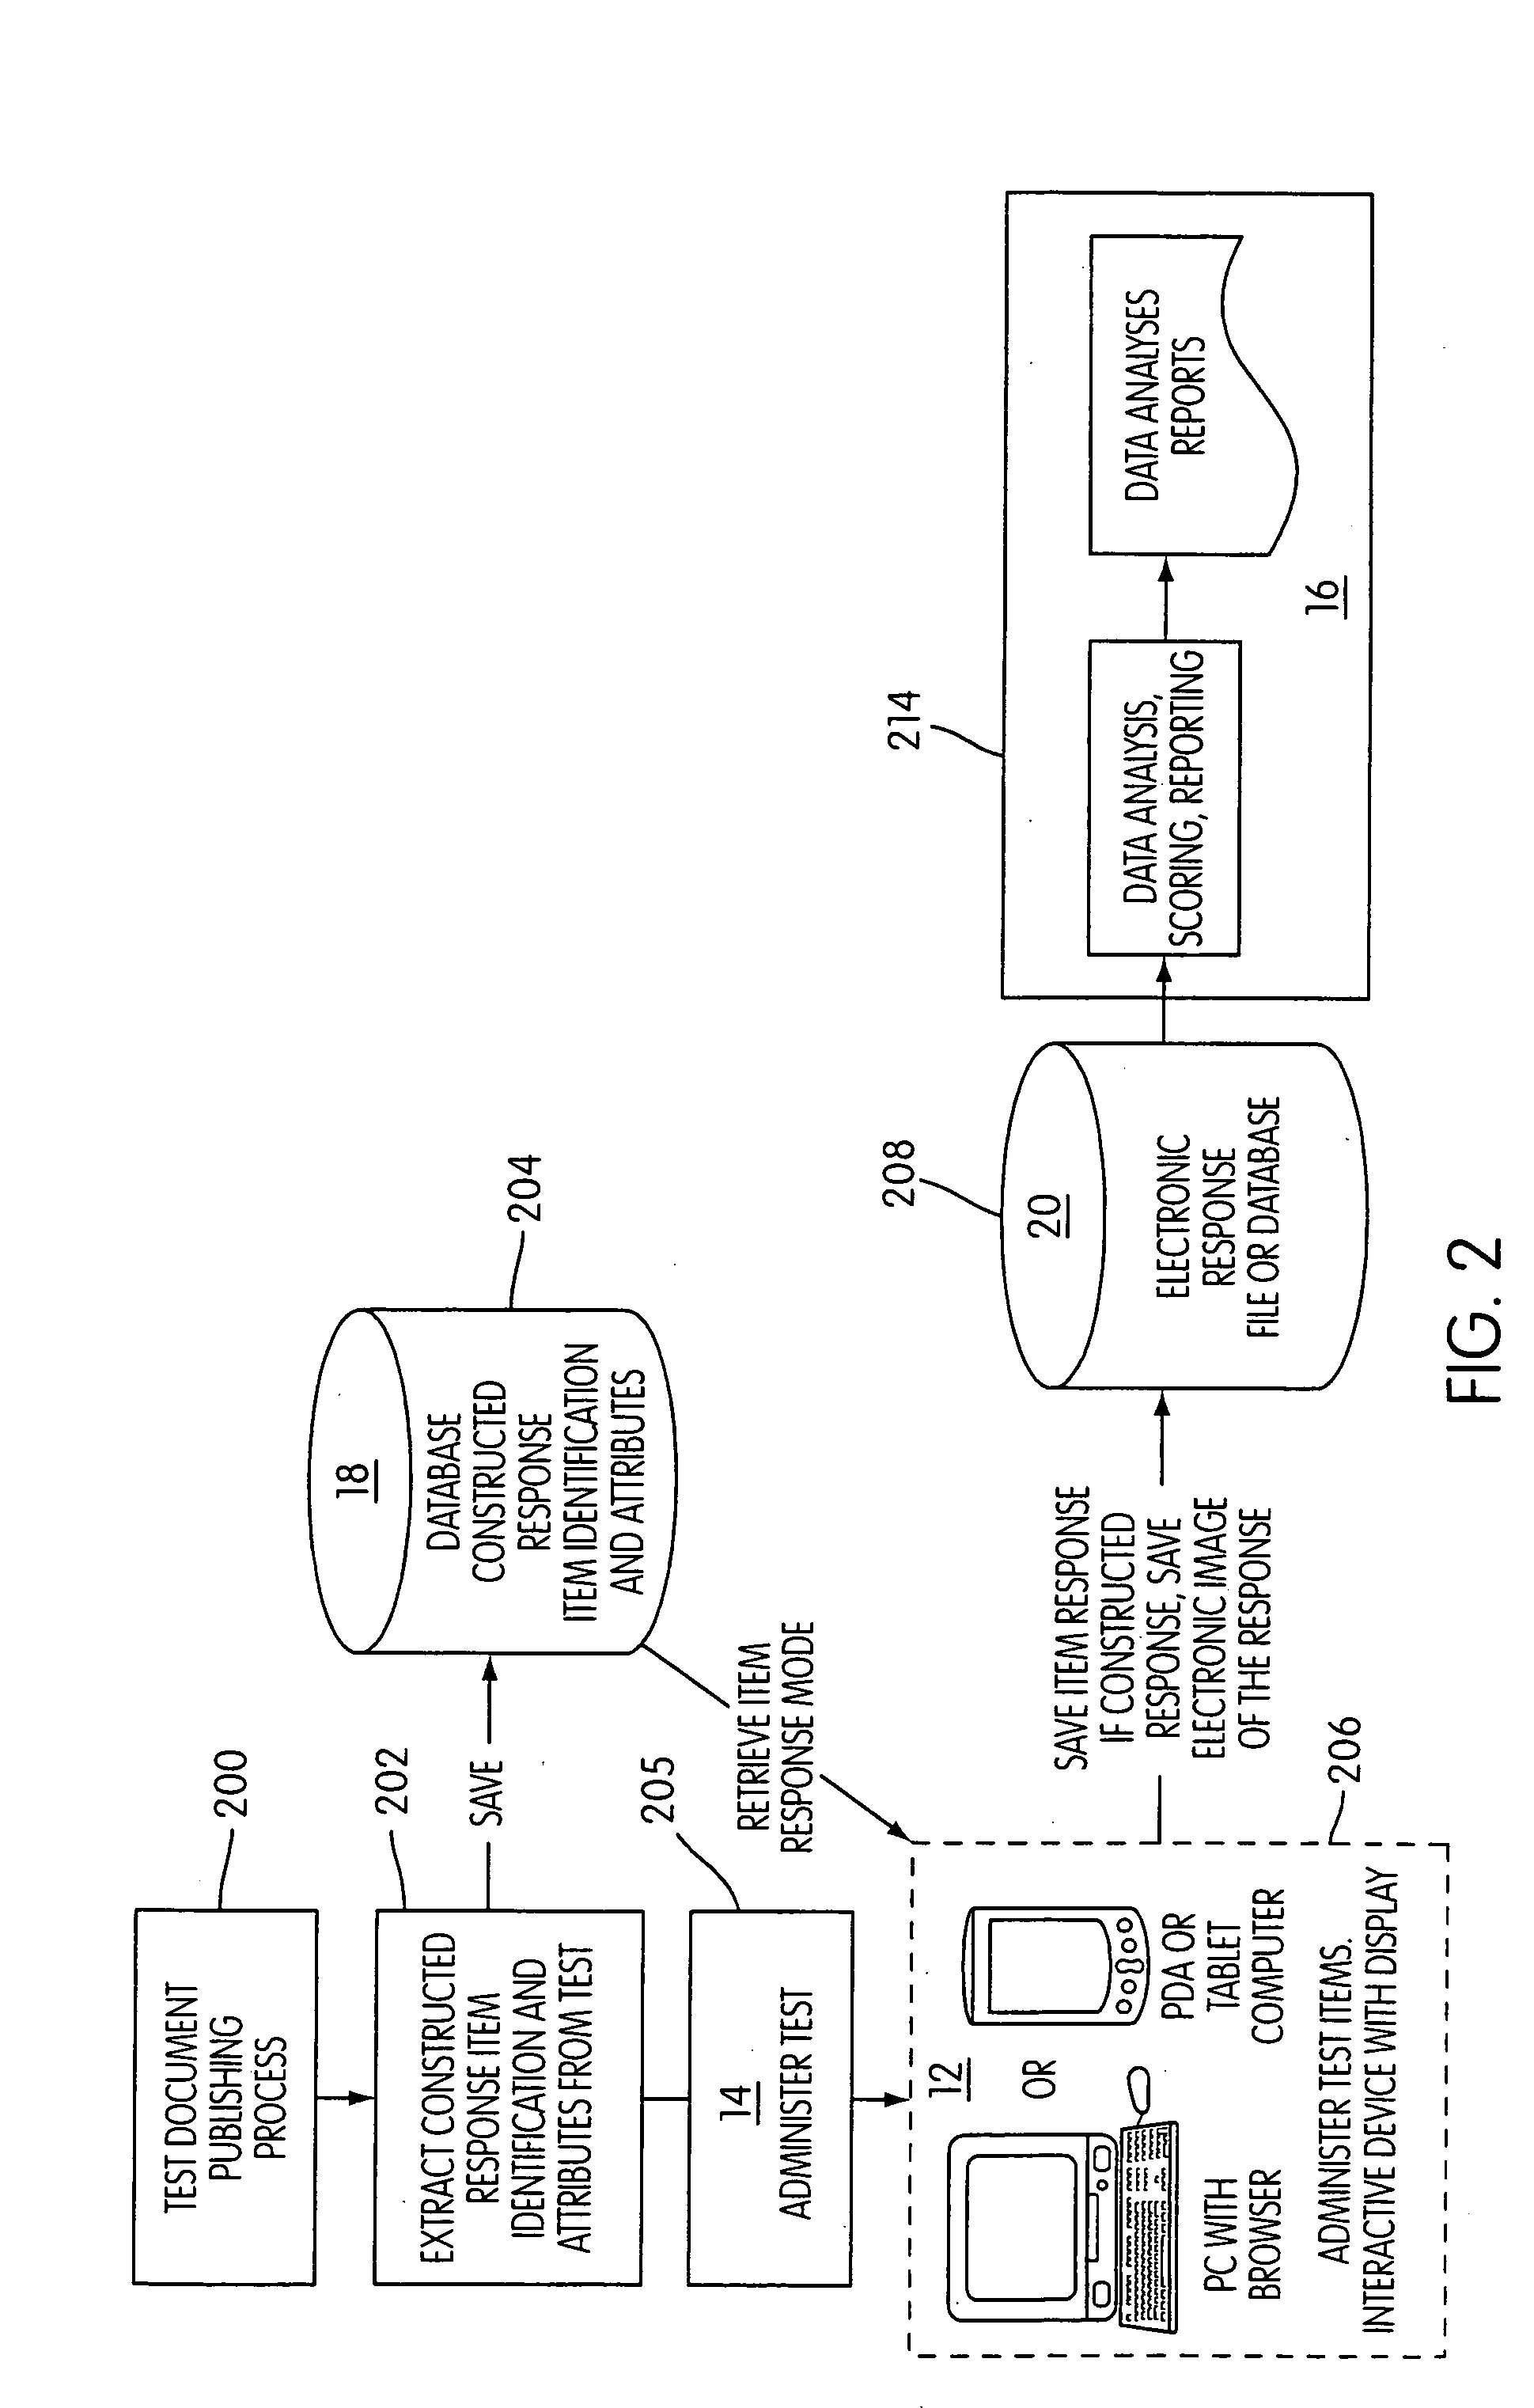 System and method of capturing and processing hand-written responses in the administration of assessments